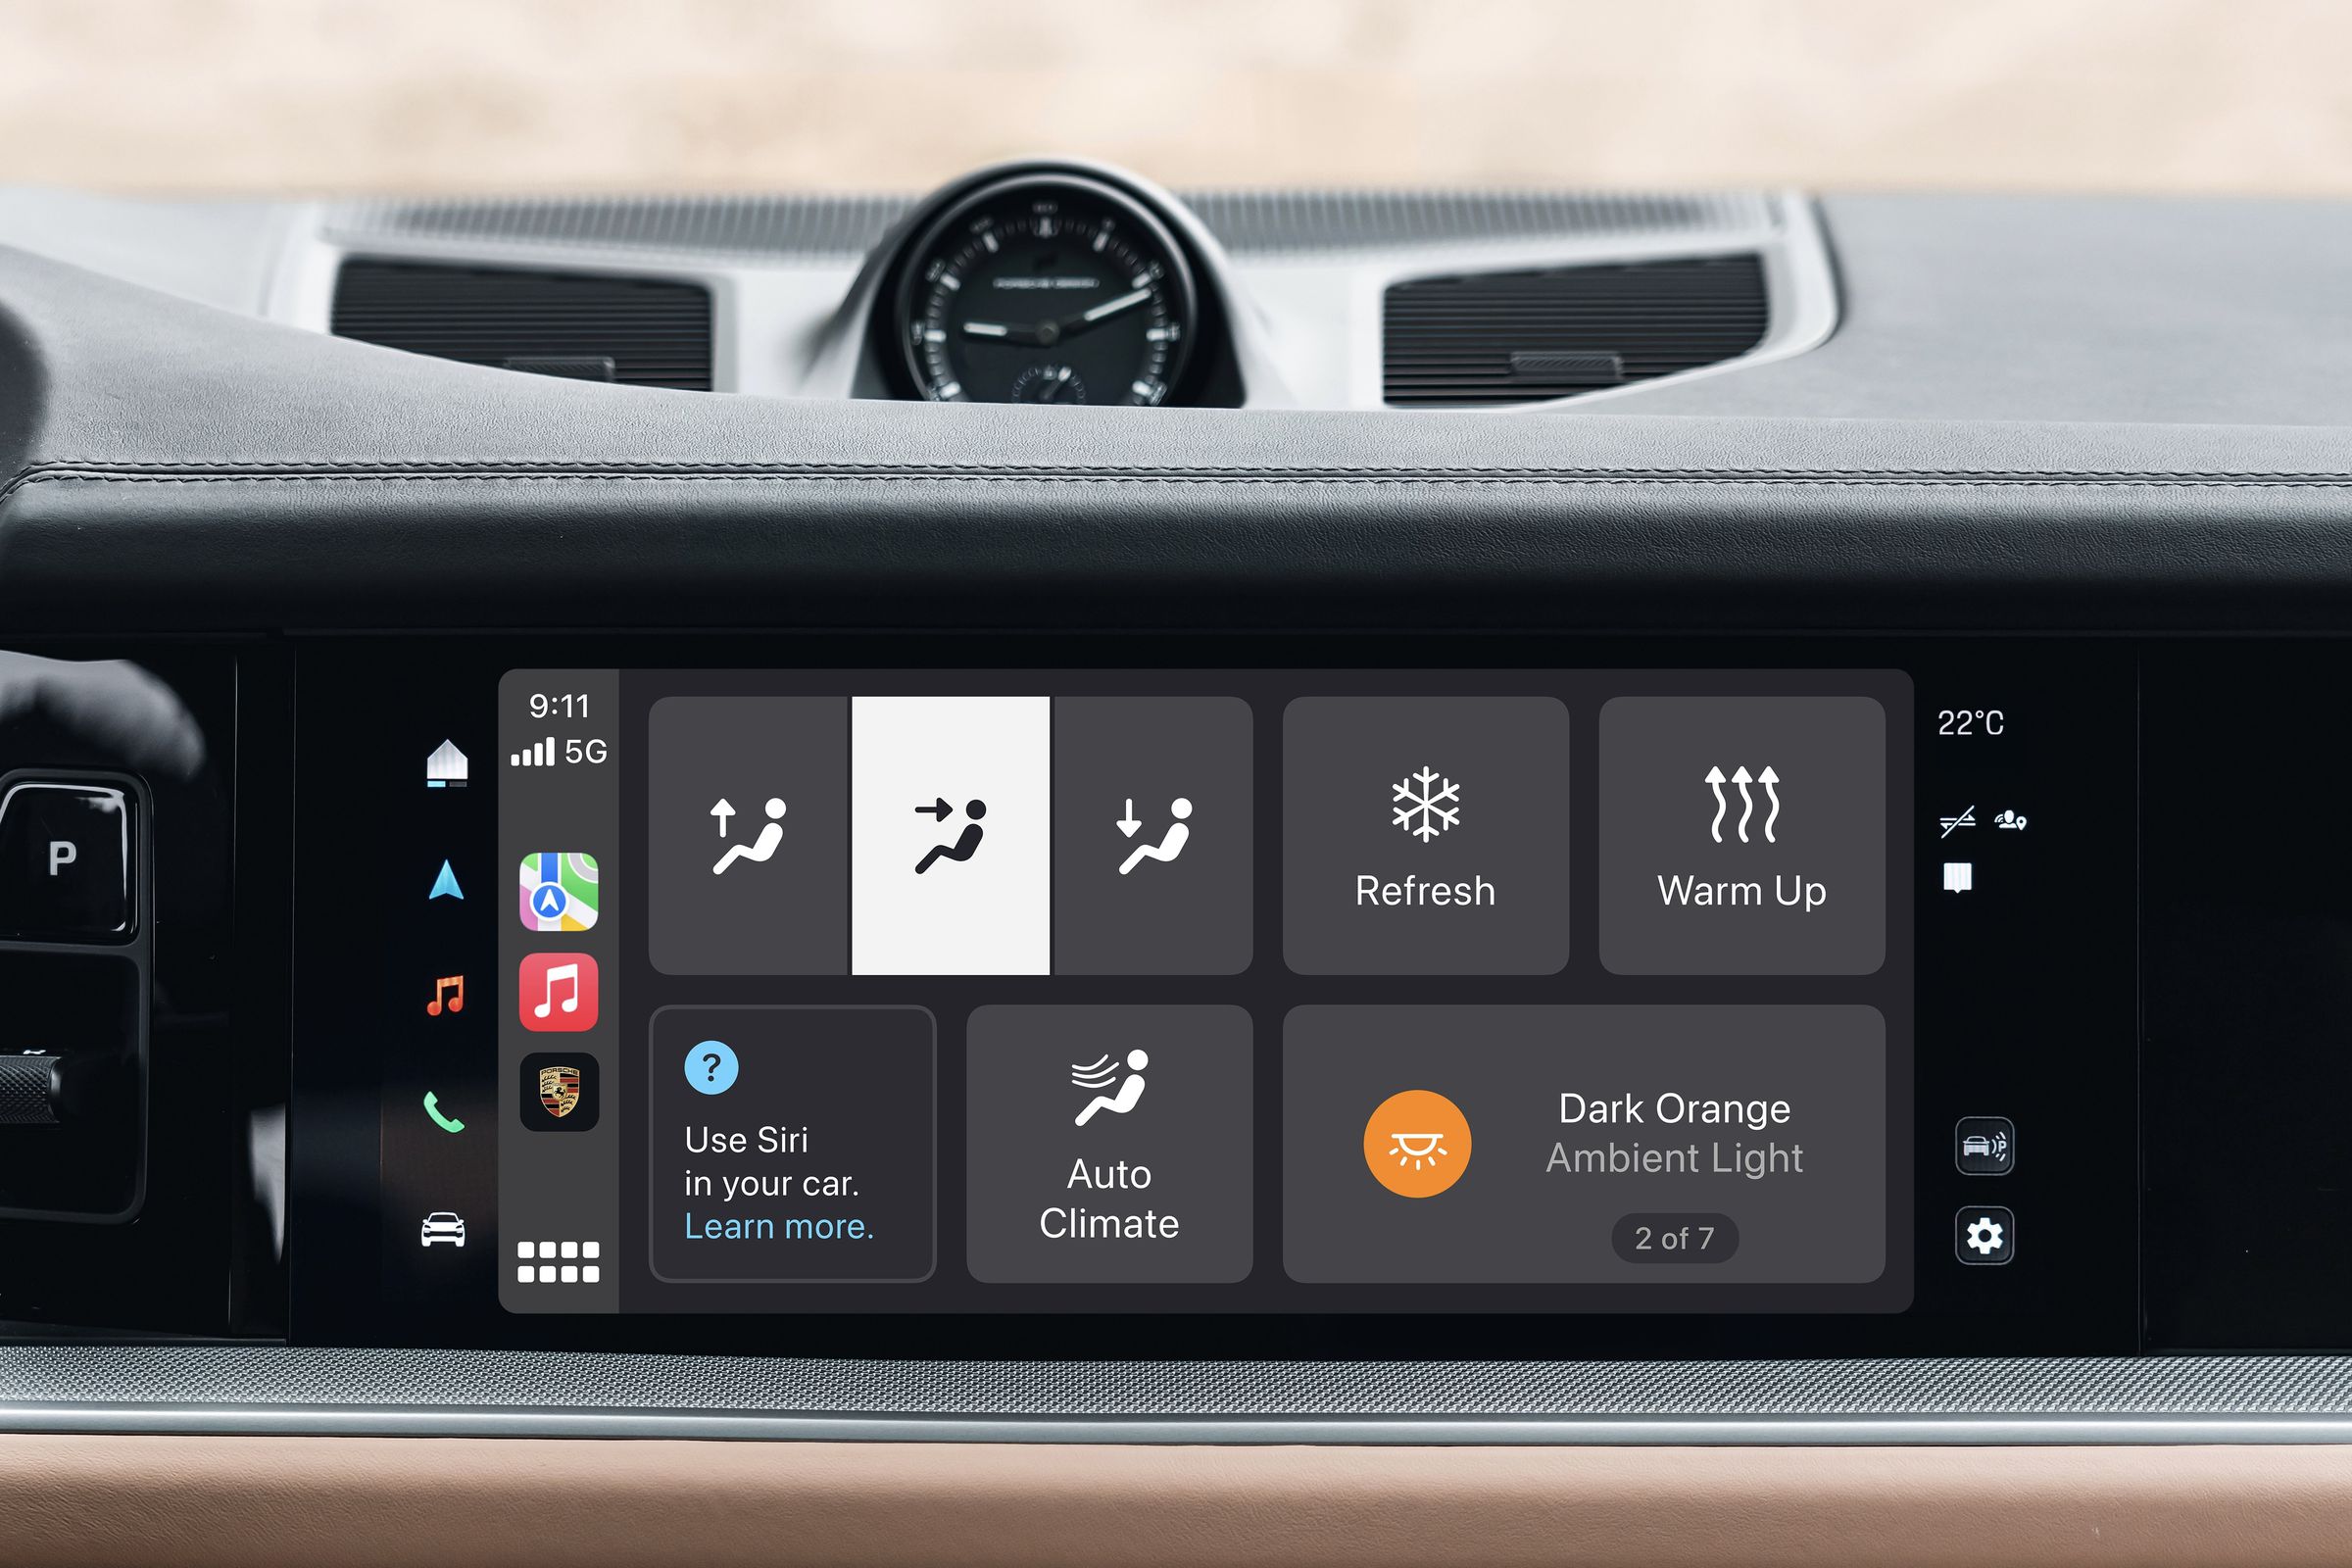 Porsche Cayenne CarPlay interface with climate buttons and an interior lighting mood adjuster